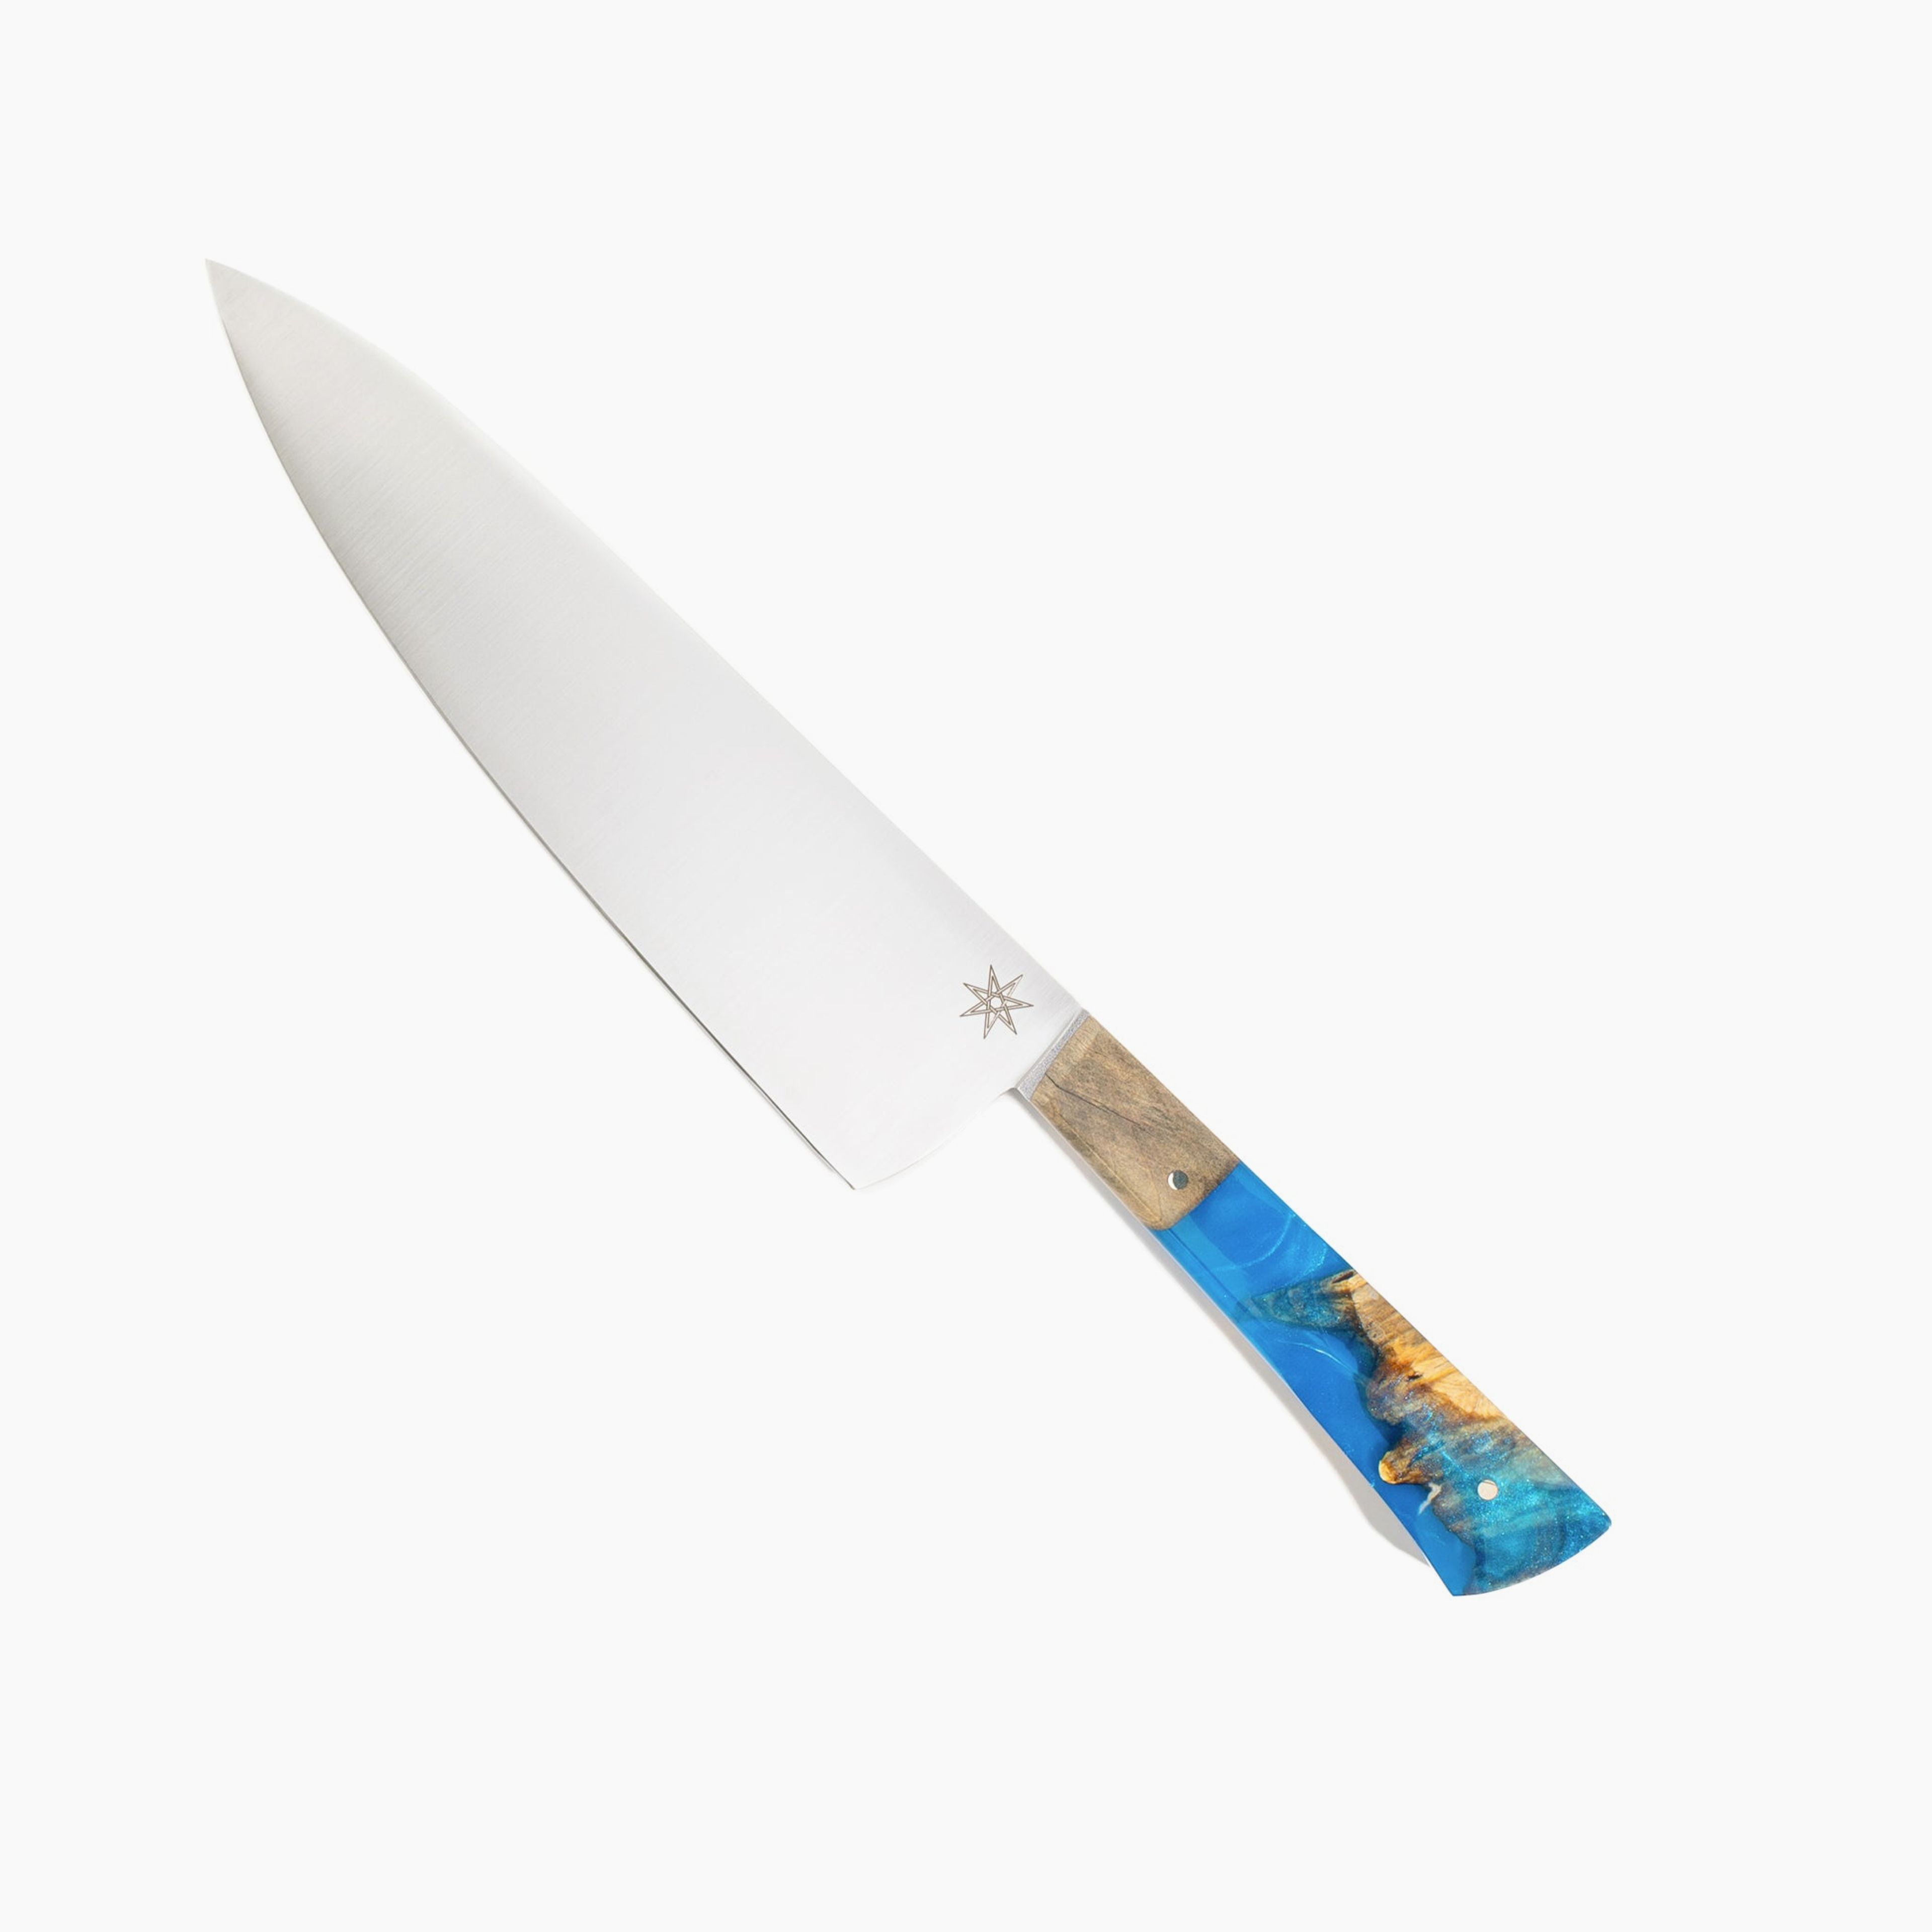 8.5" Chef Knife - Tahoe Bliss